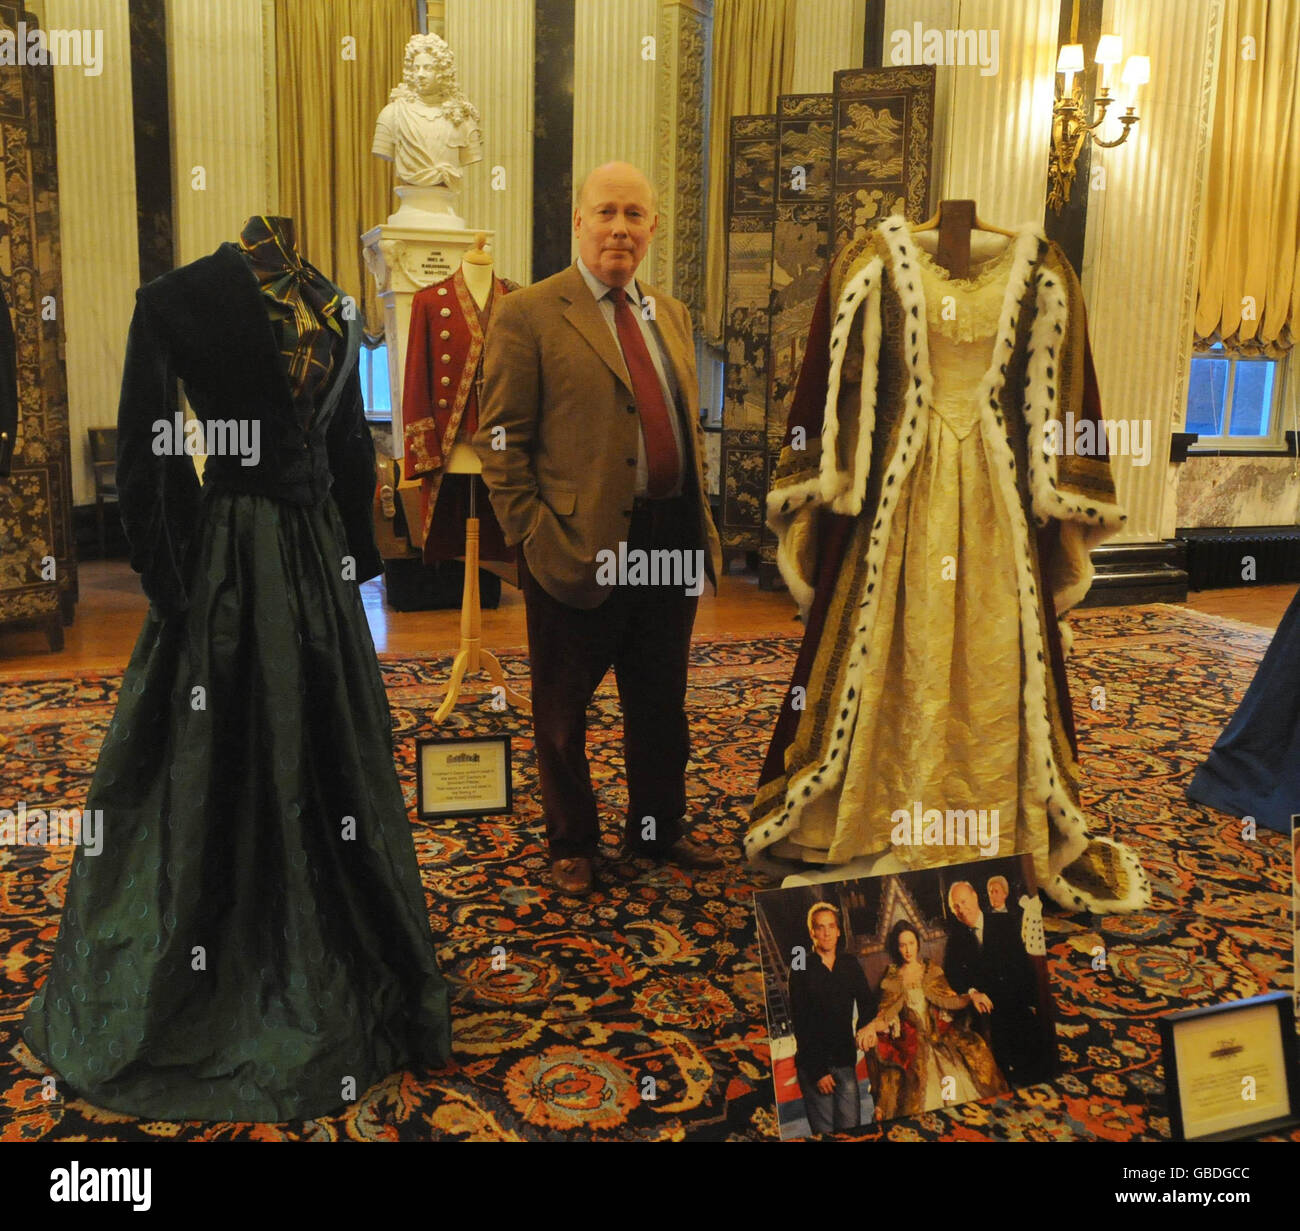 Julian Fellowes, with costumes from the film, The Young Victoria which is due to be released on March 6, inside an exhibition at Blenheim Palace, Woodstock. Stock Photo